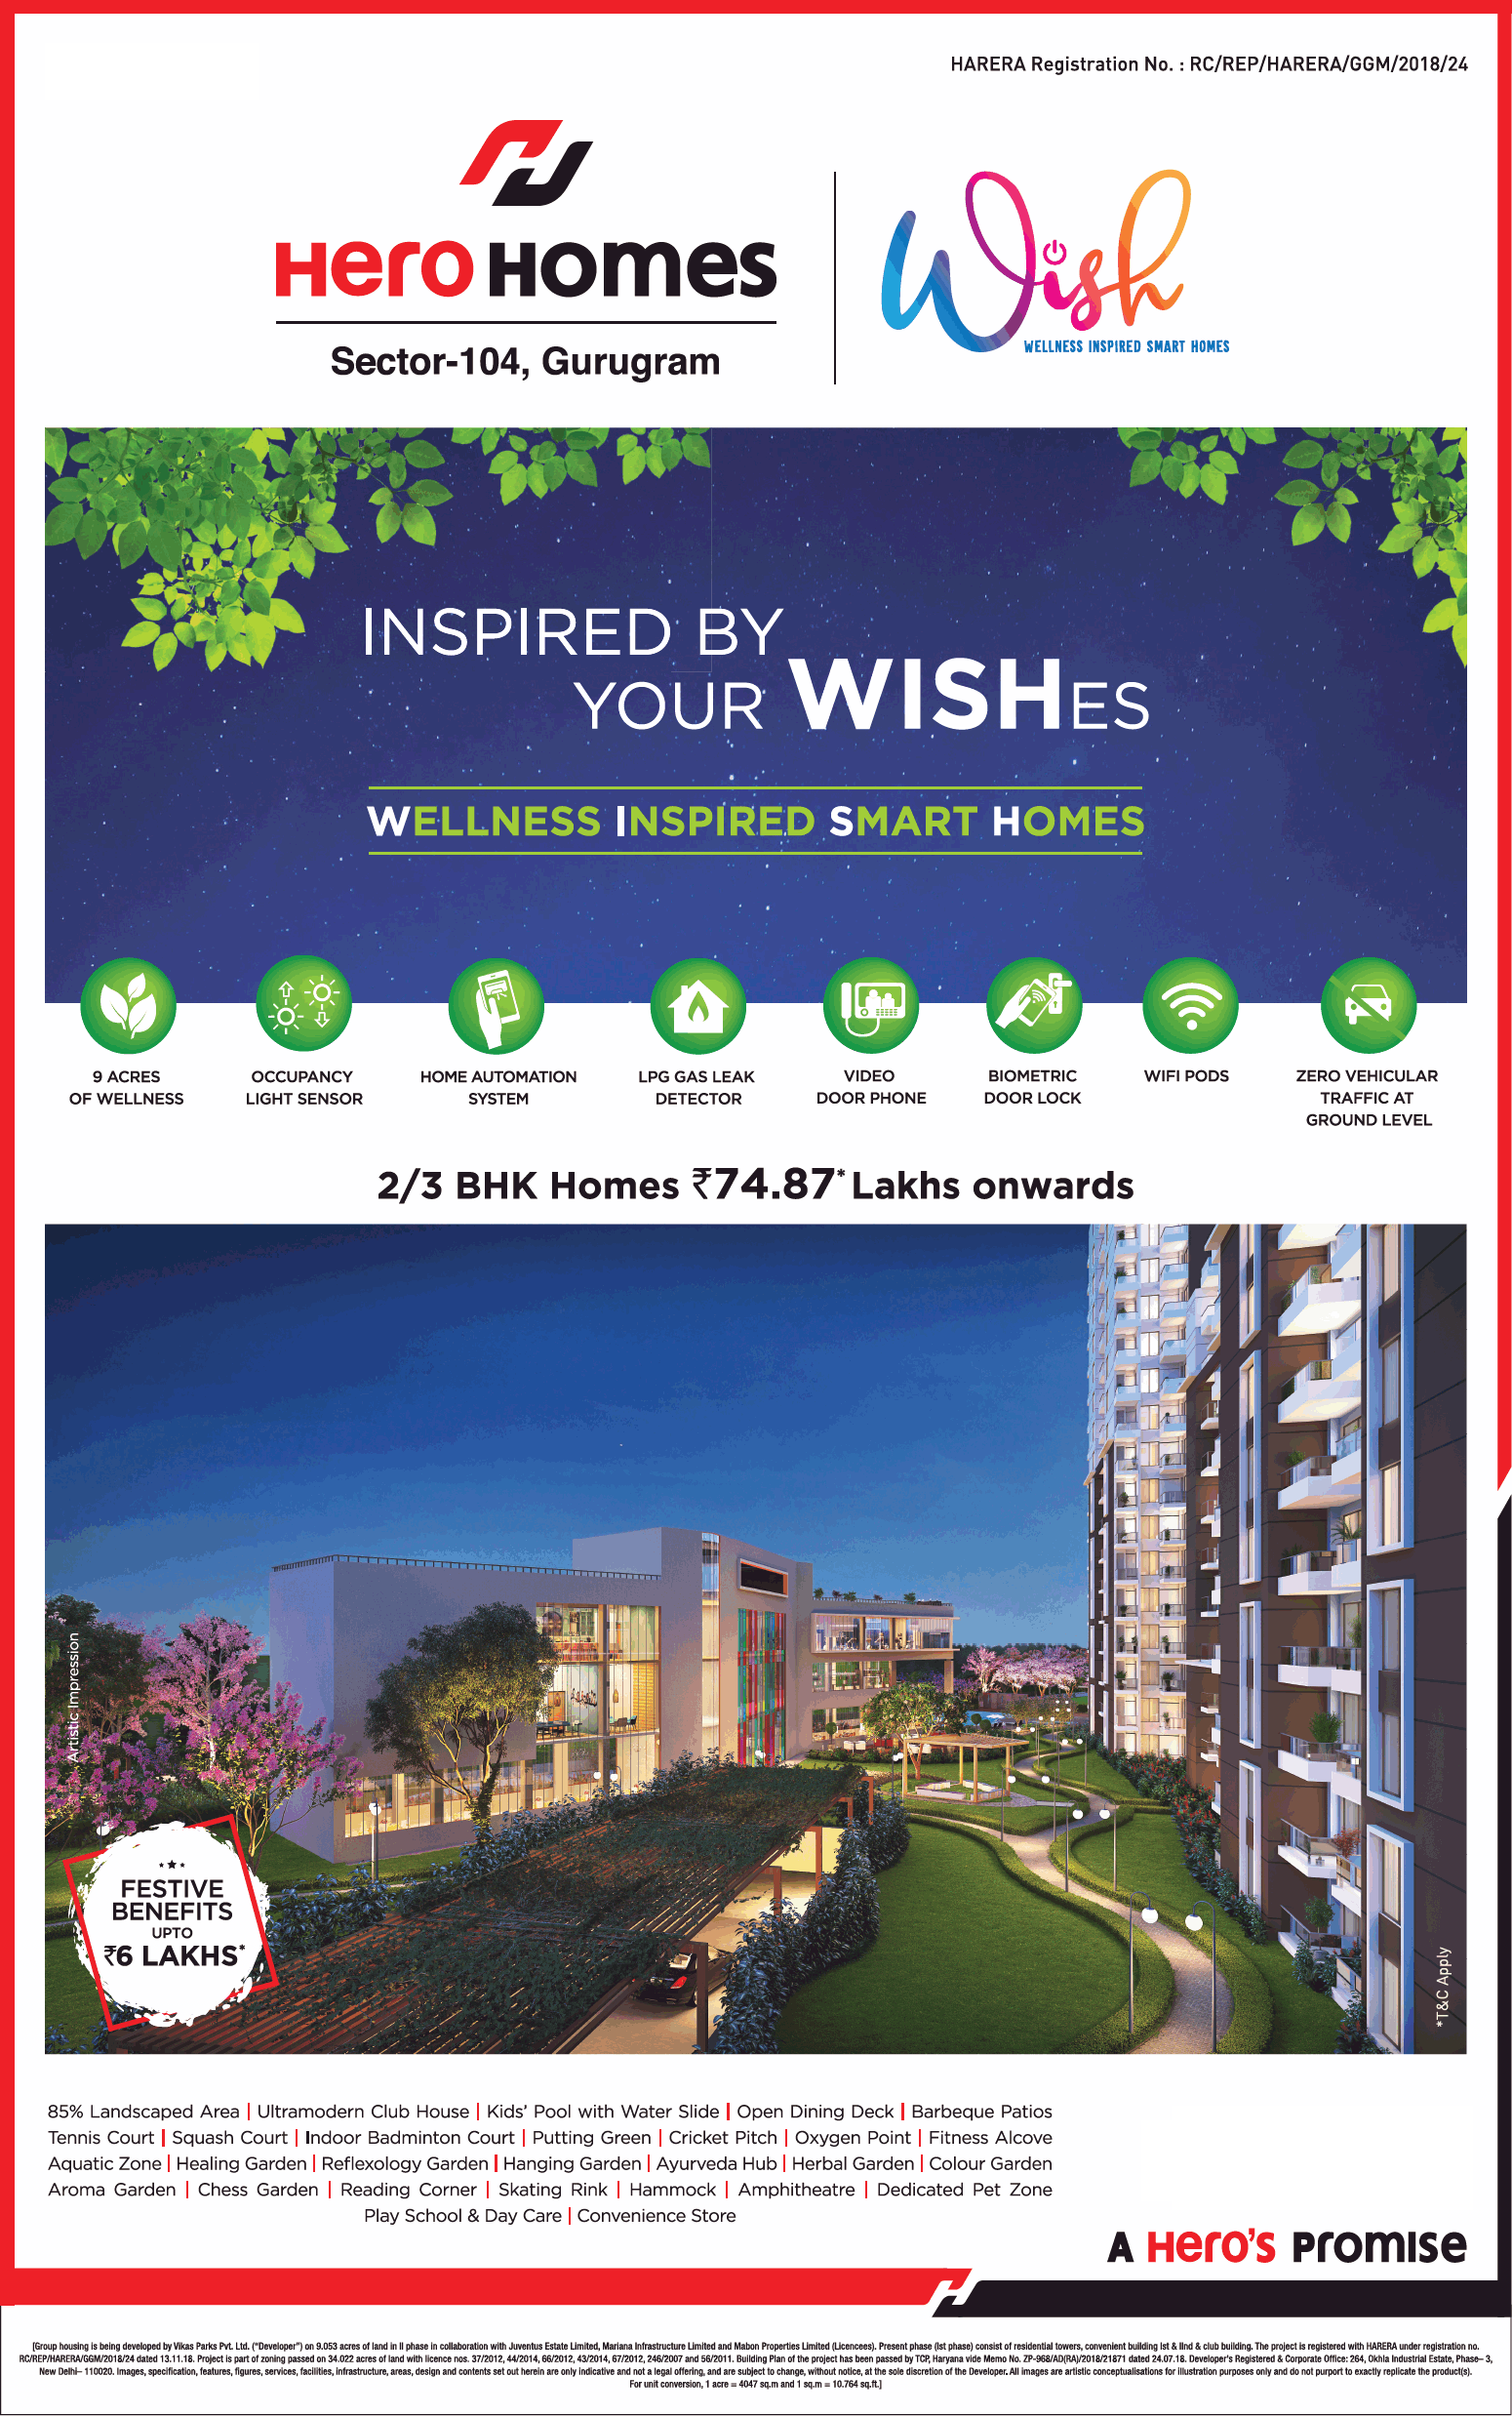 Wellness inspired smart home at Hero Homes in  Sector 104, Gurgaon